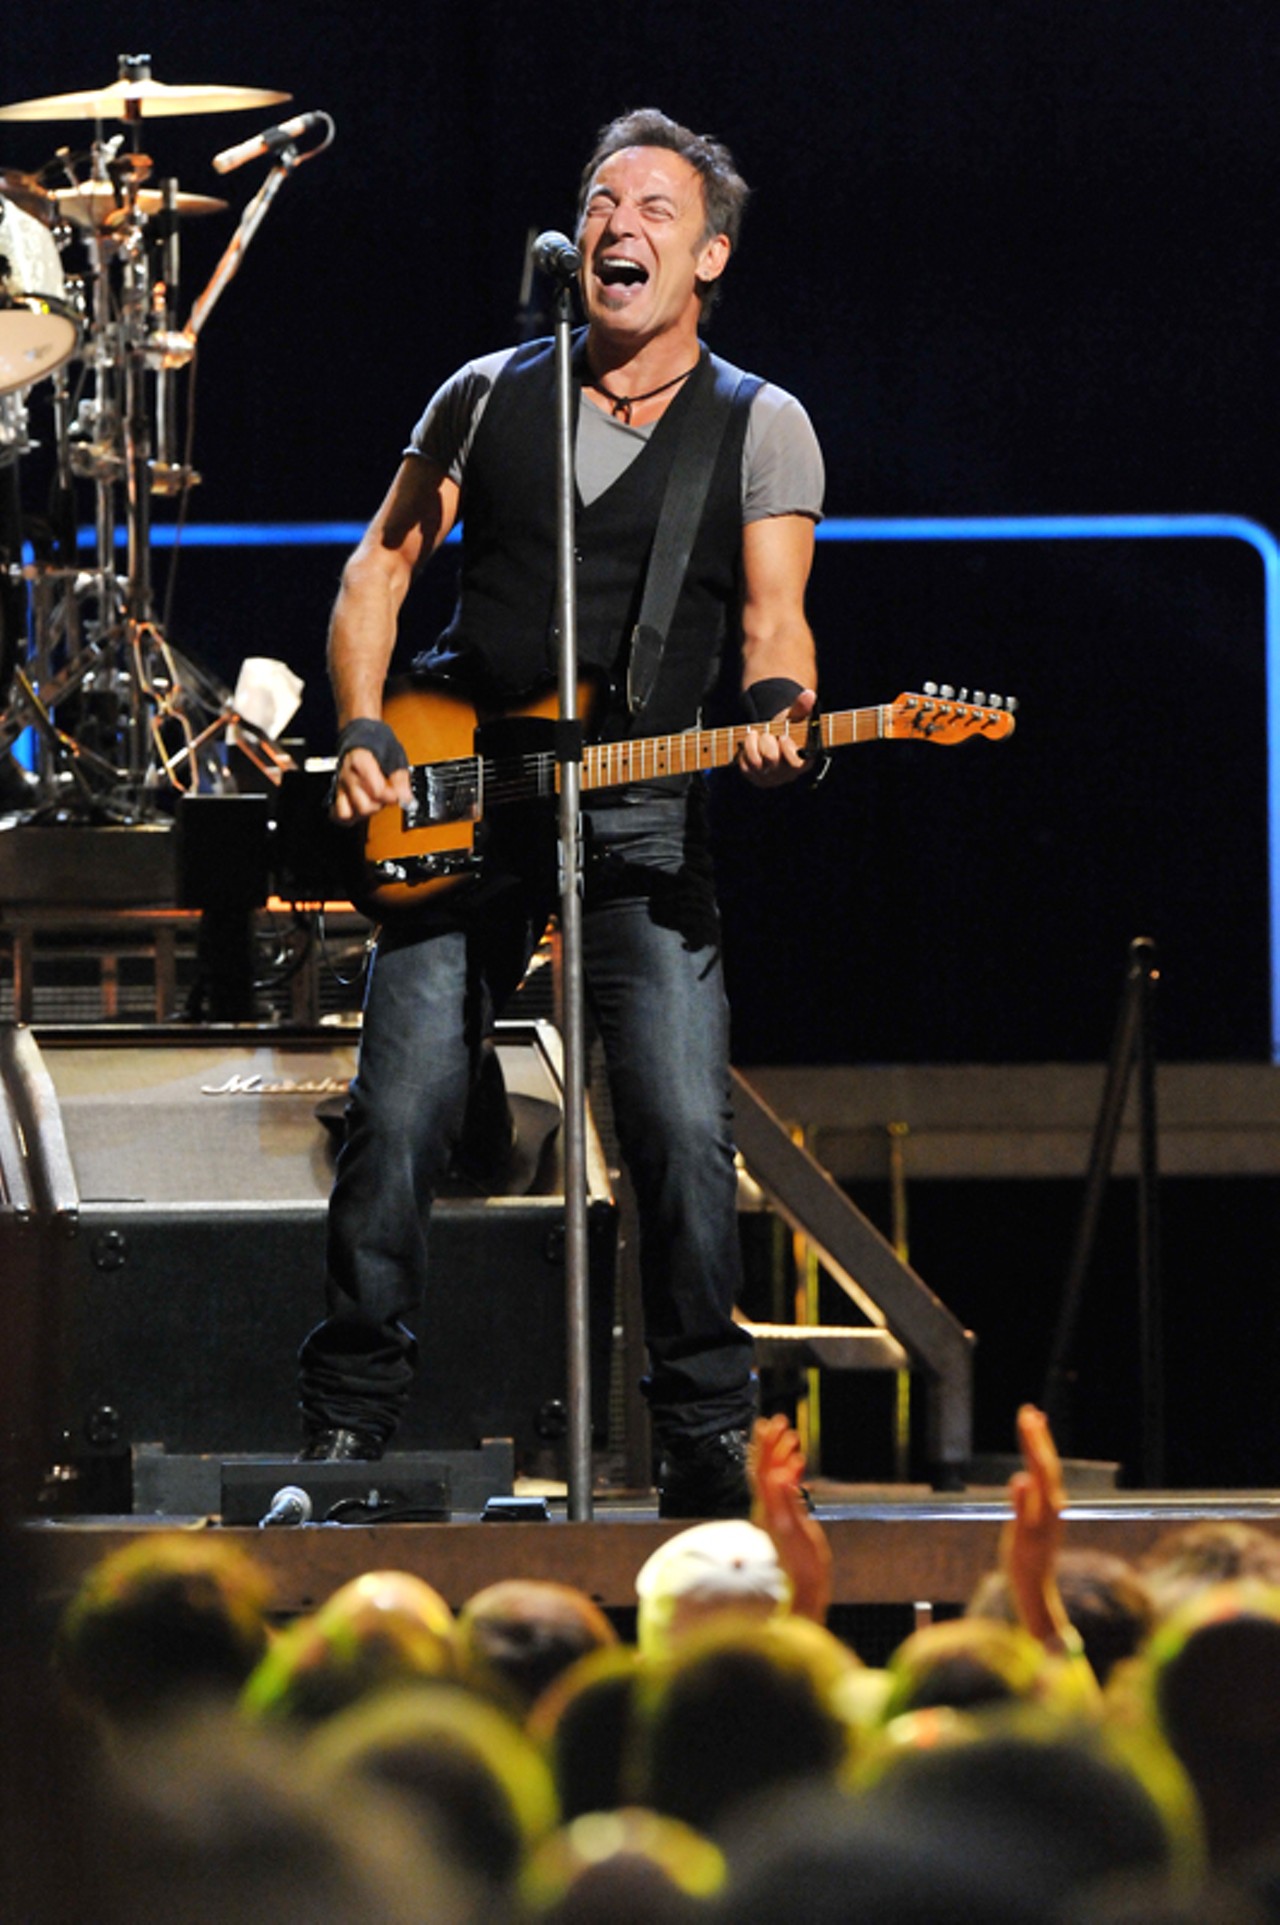 Bruce Springsteen at the Scottrade Center, 10/25/09